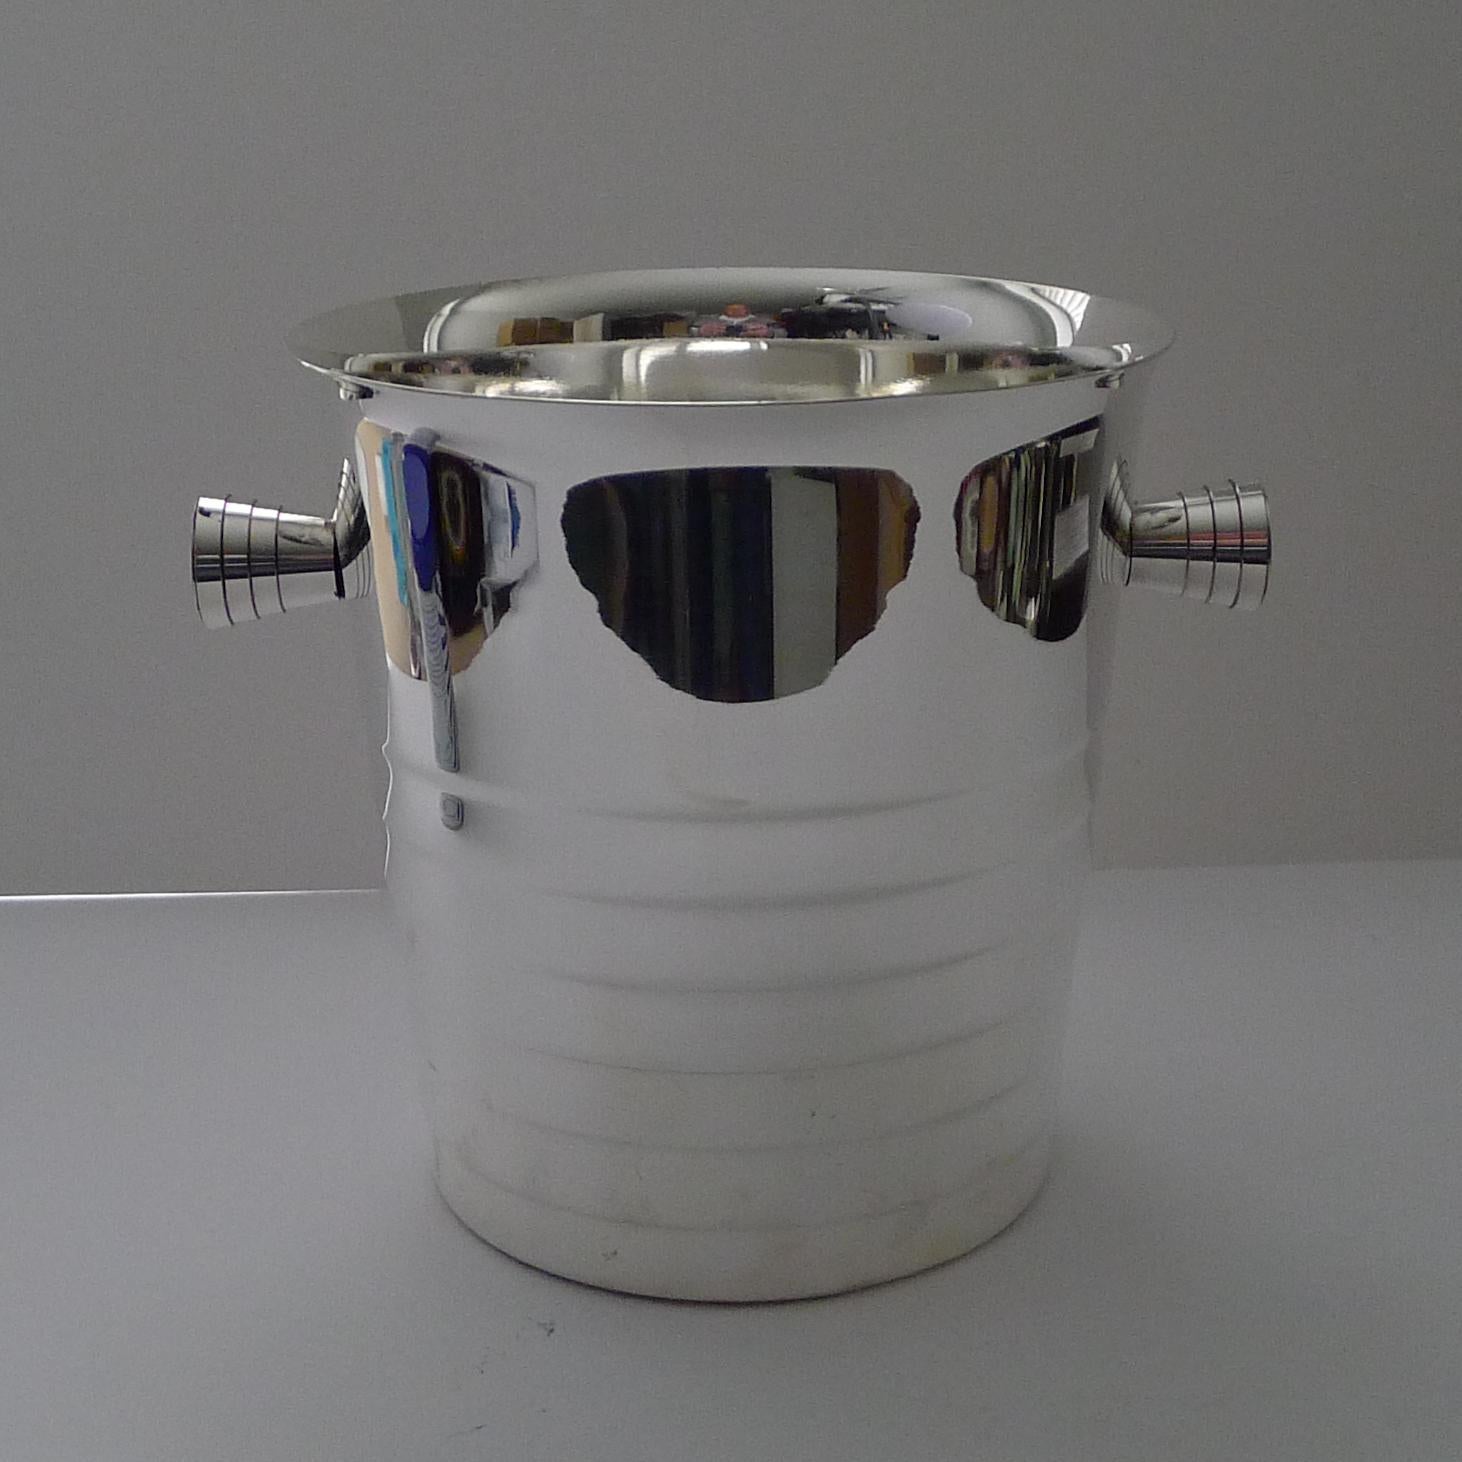 A fine and very smart champagne bucket / wine cooler made by the top-notch French silversmith, Christofle of Paris.

The design is 